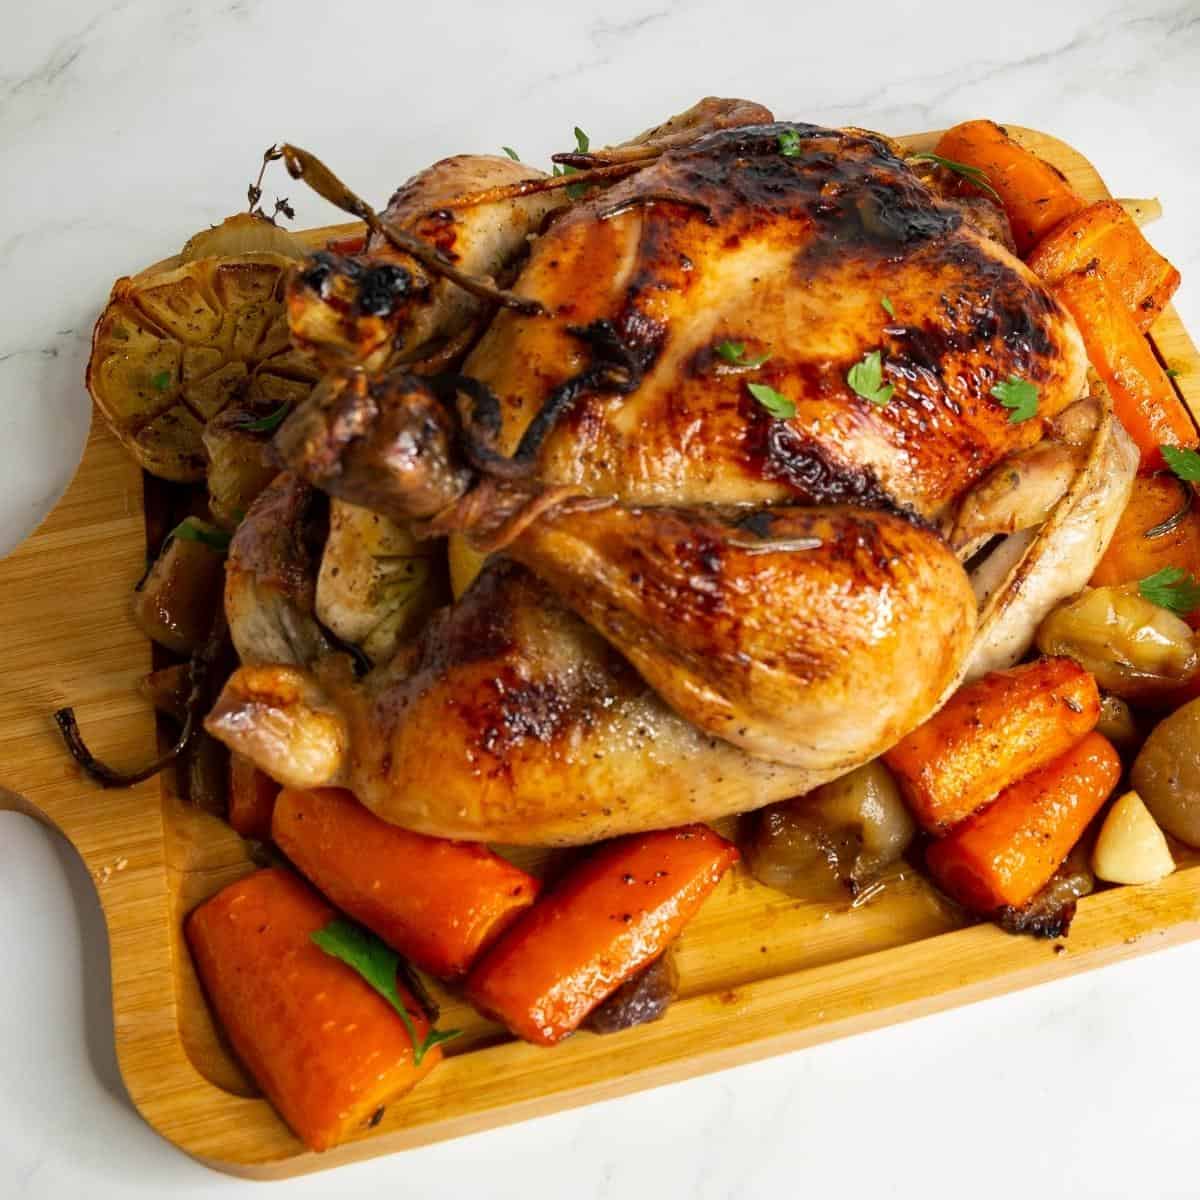 Roasted chicken with veggies on a serving platter.